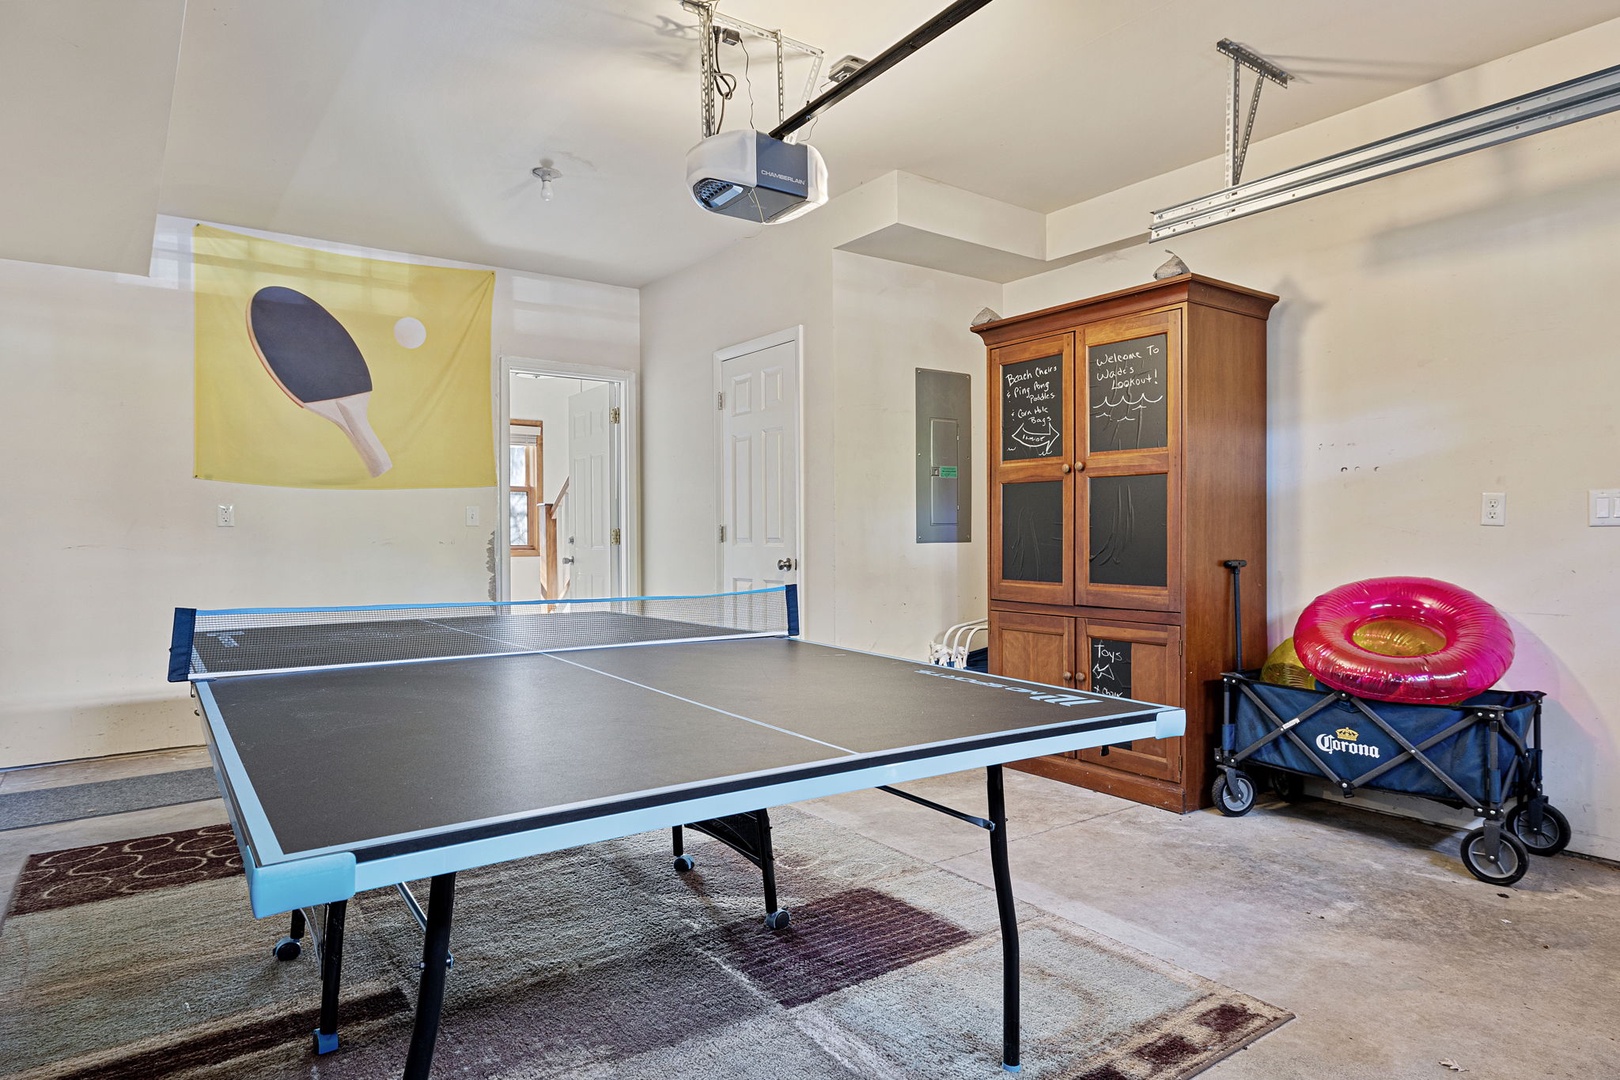 The ping-pong room has plenty of space and seating.